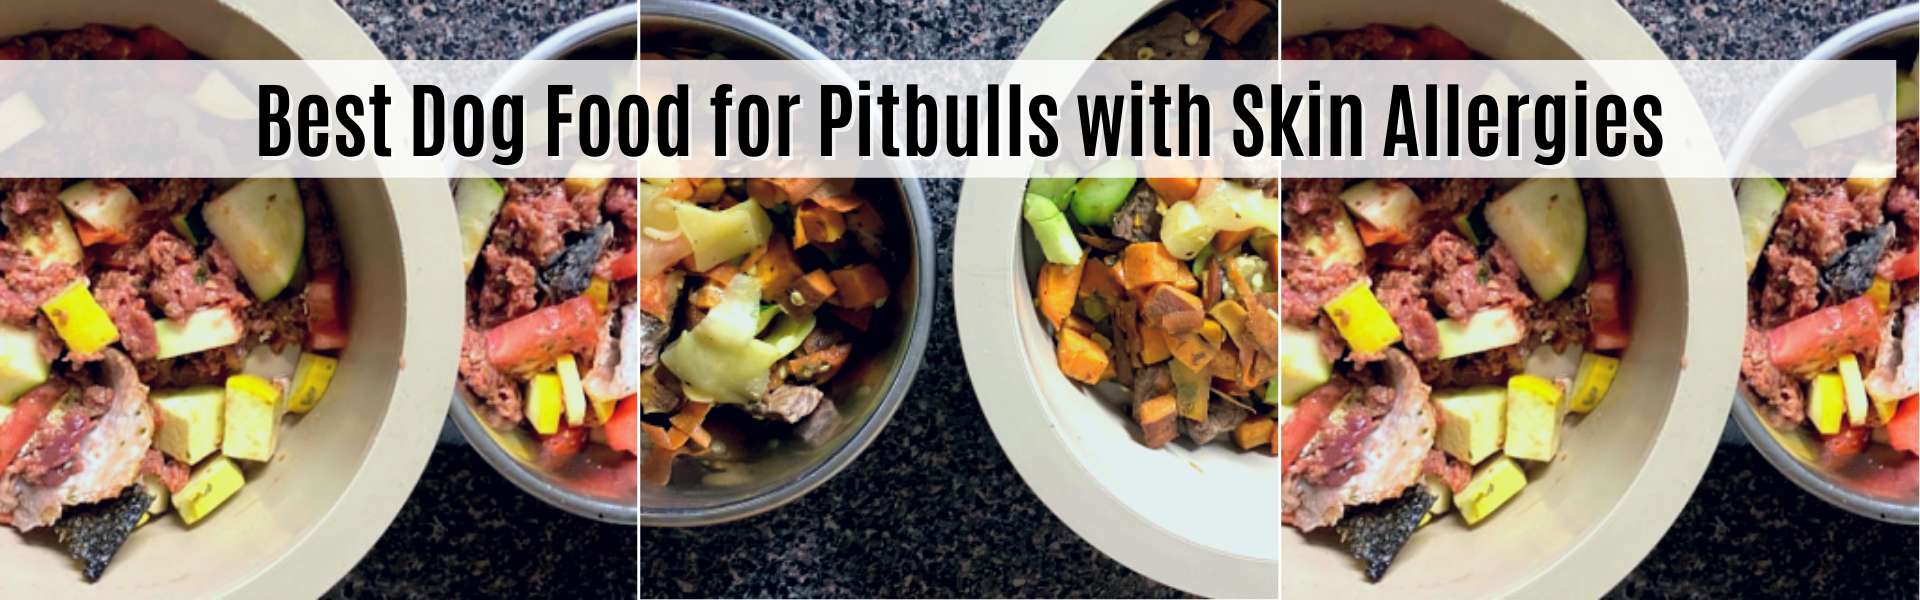 best food for pitbulls with skin allergies